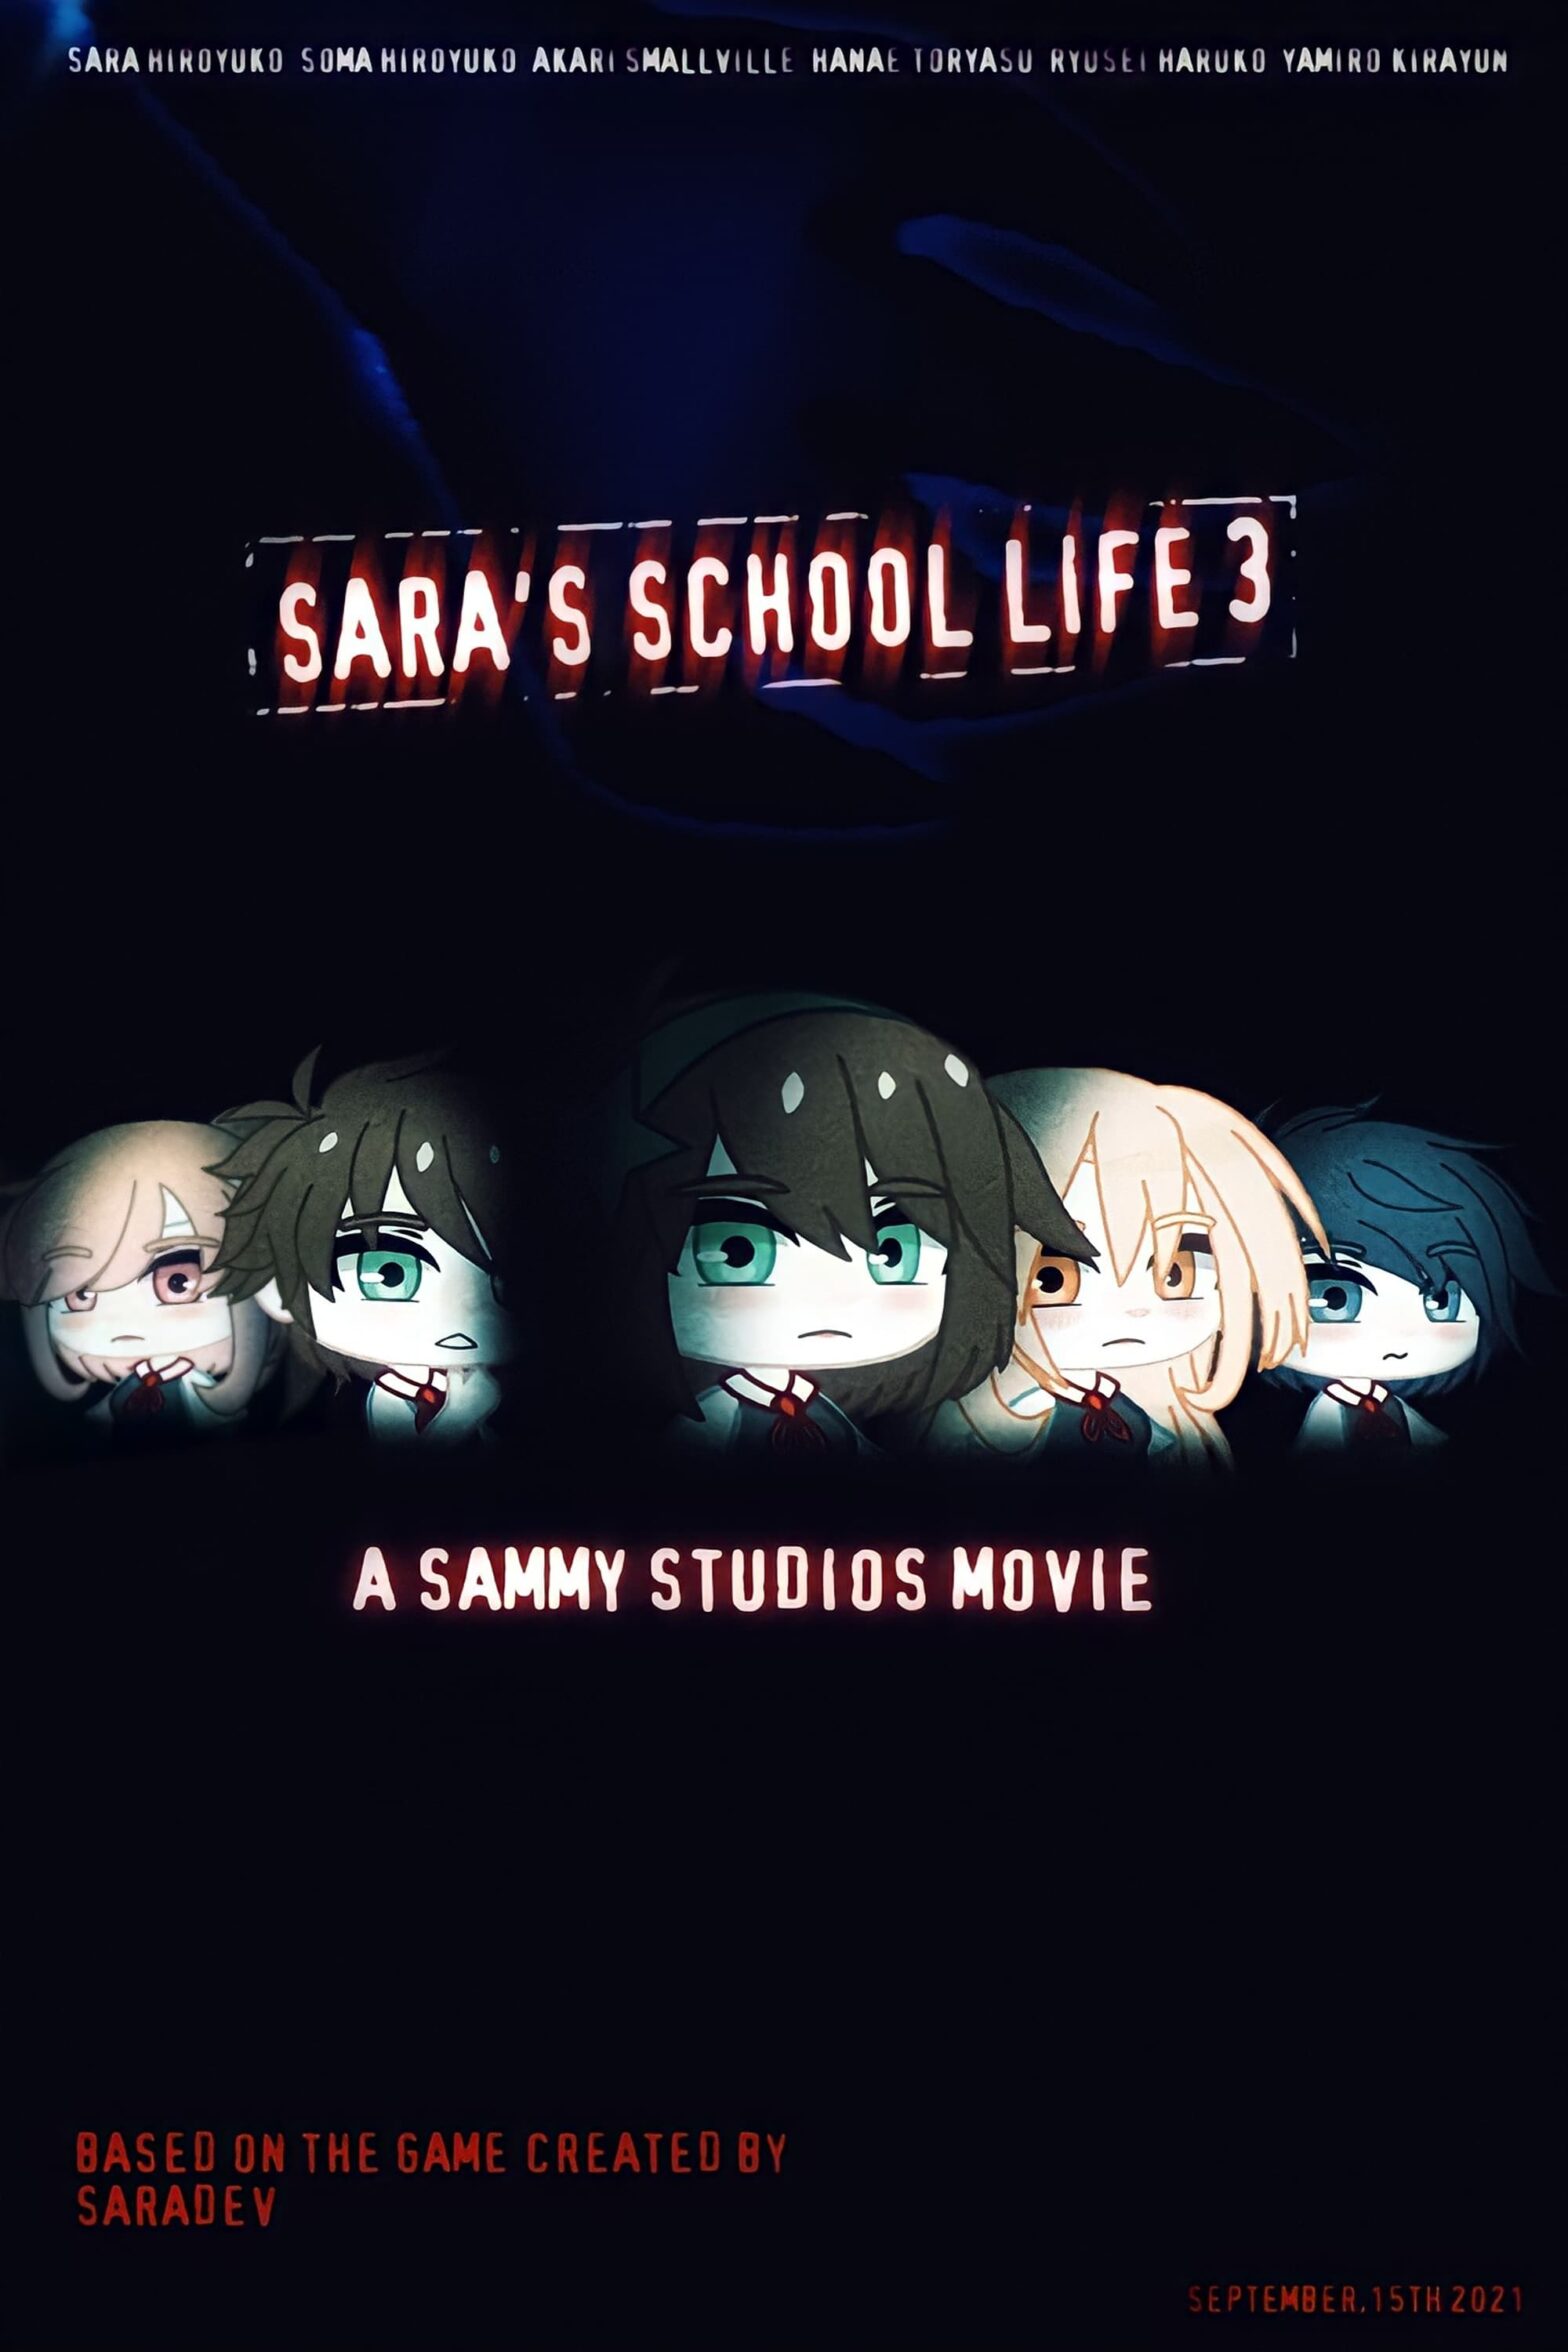 Poster for the movie "Sara's School Life 3"